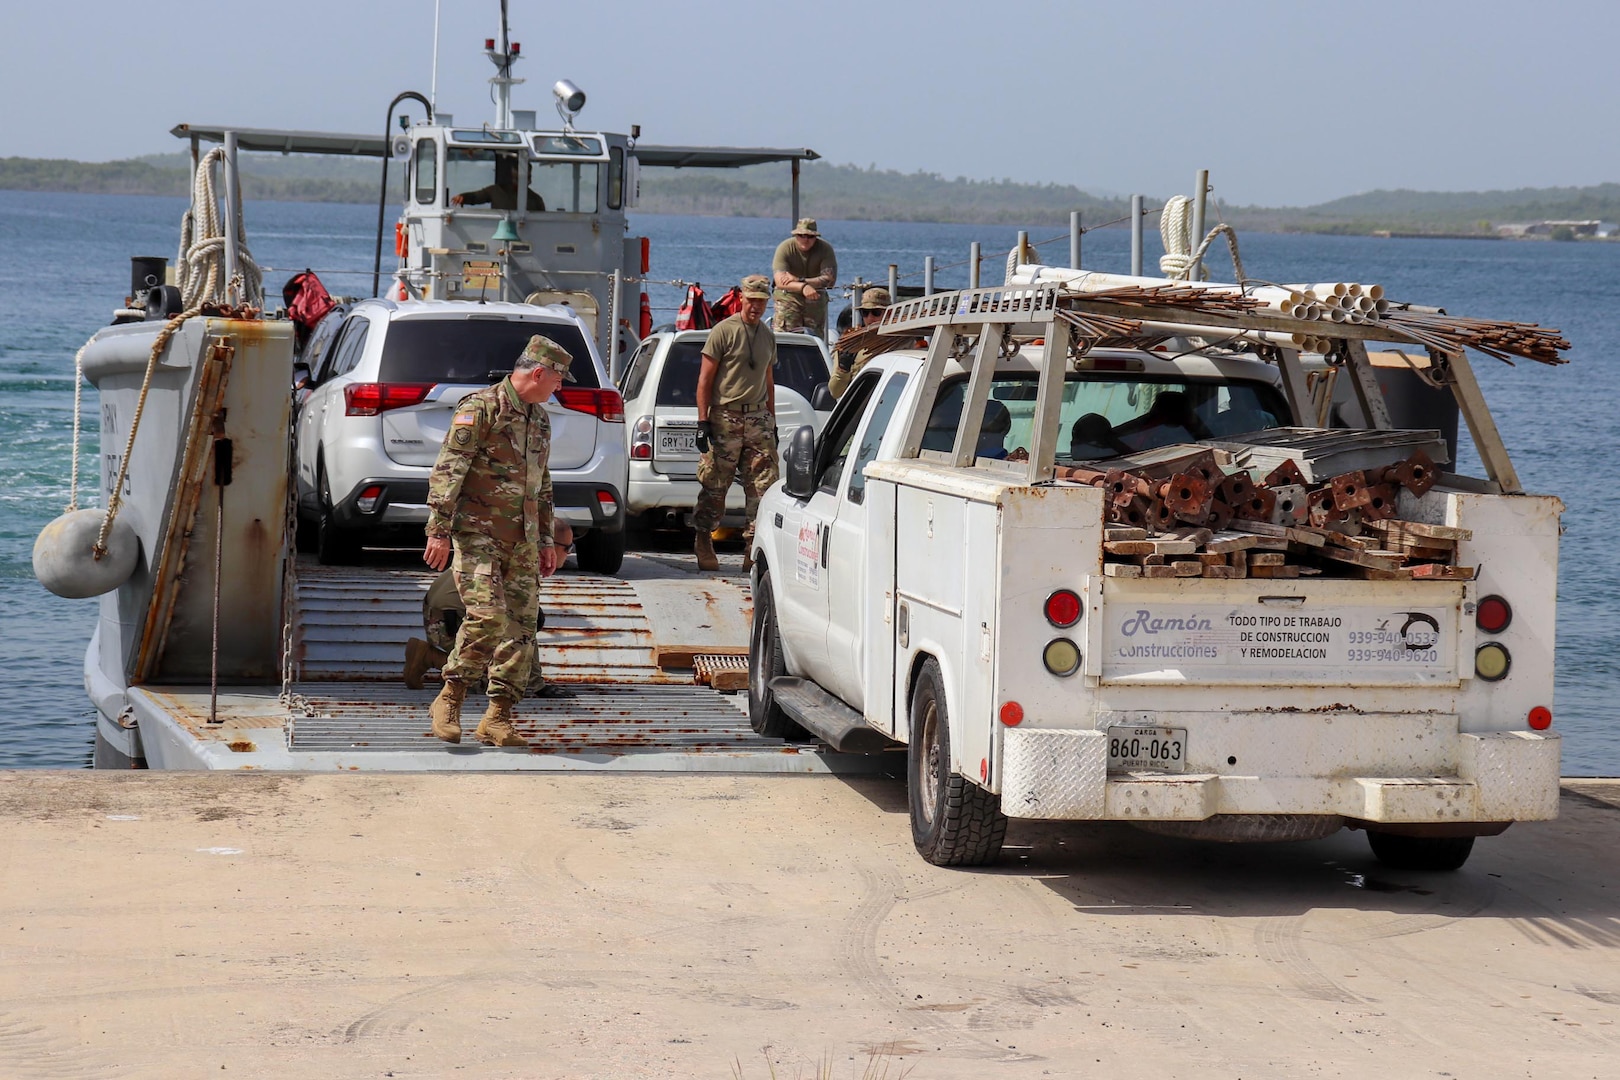 The Puerto Rico National Guard loads vehicles at its pier in Roosevelt Roads, Ceiba, Oct. 7, 2019, for a trip to the island of Vieques. Gov. Wanda Vazquez Garced activated the PRNG to provide cargo ferry service to Vieques and Culebra after two Maritime Transport Authority vessels suffered mechanical problems. The journey to the Islands takes nearly three hours roundtrip, depending on conditions.